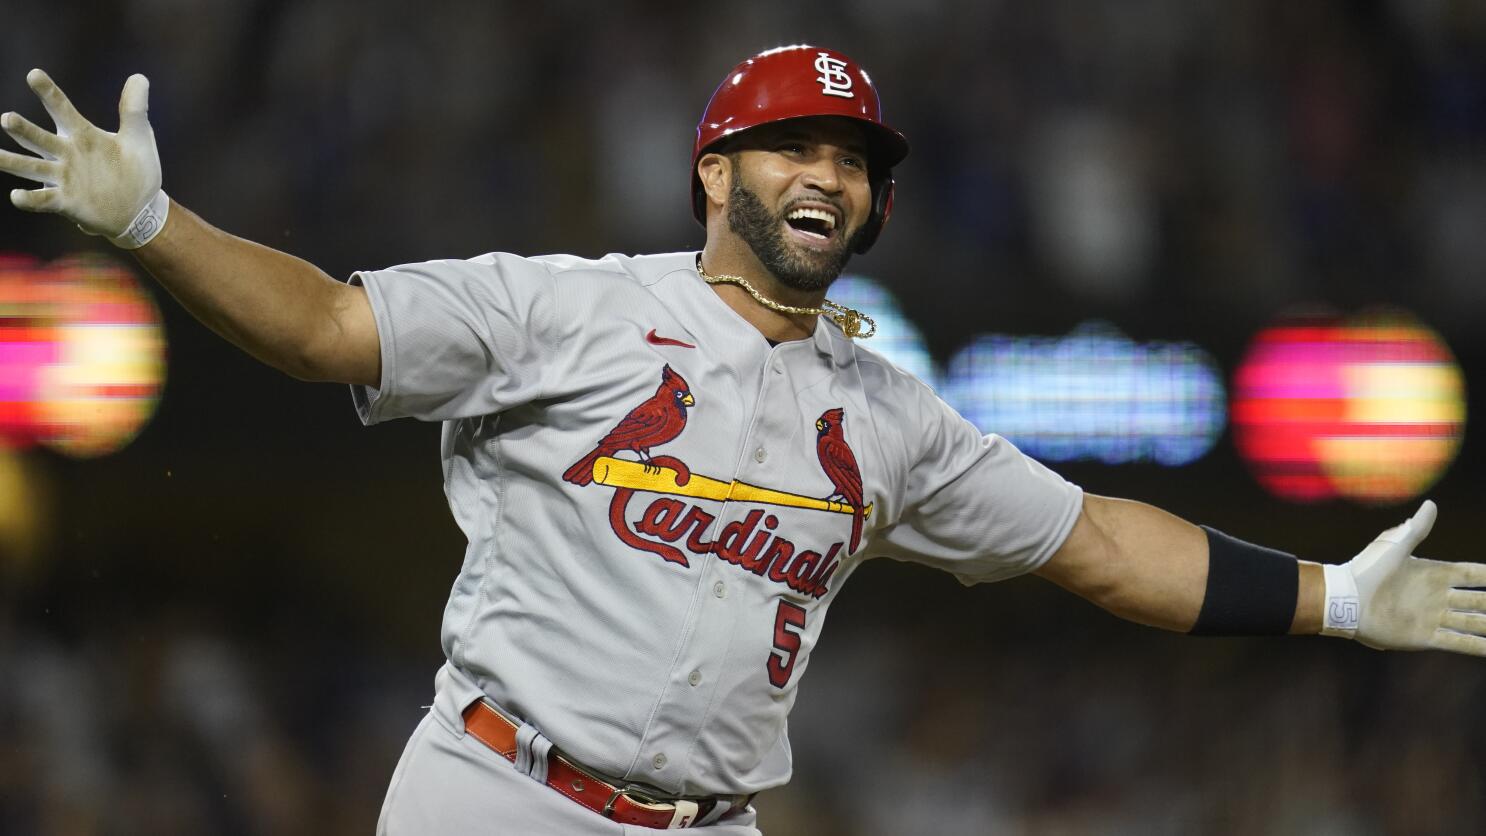 Albert Pujols to work with young players, be Angels ambassador